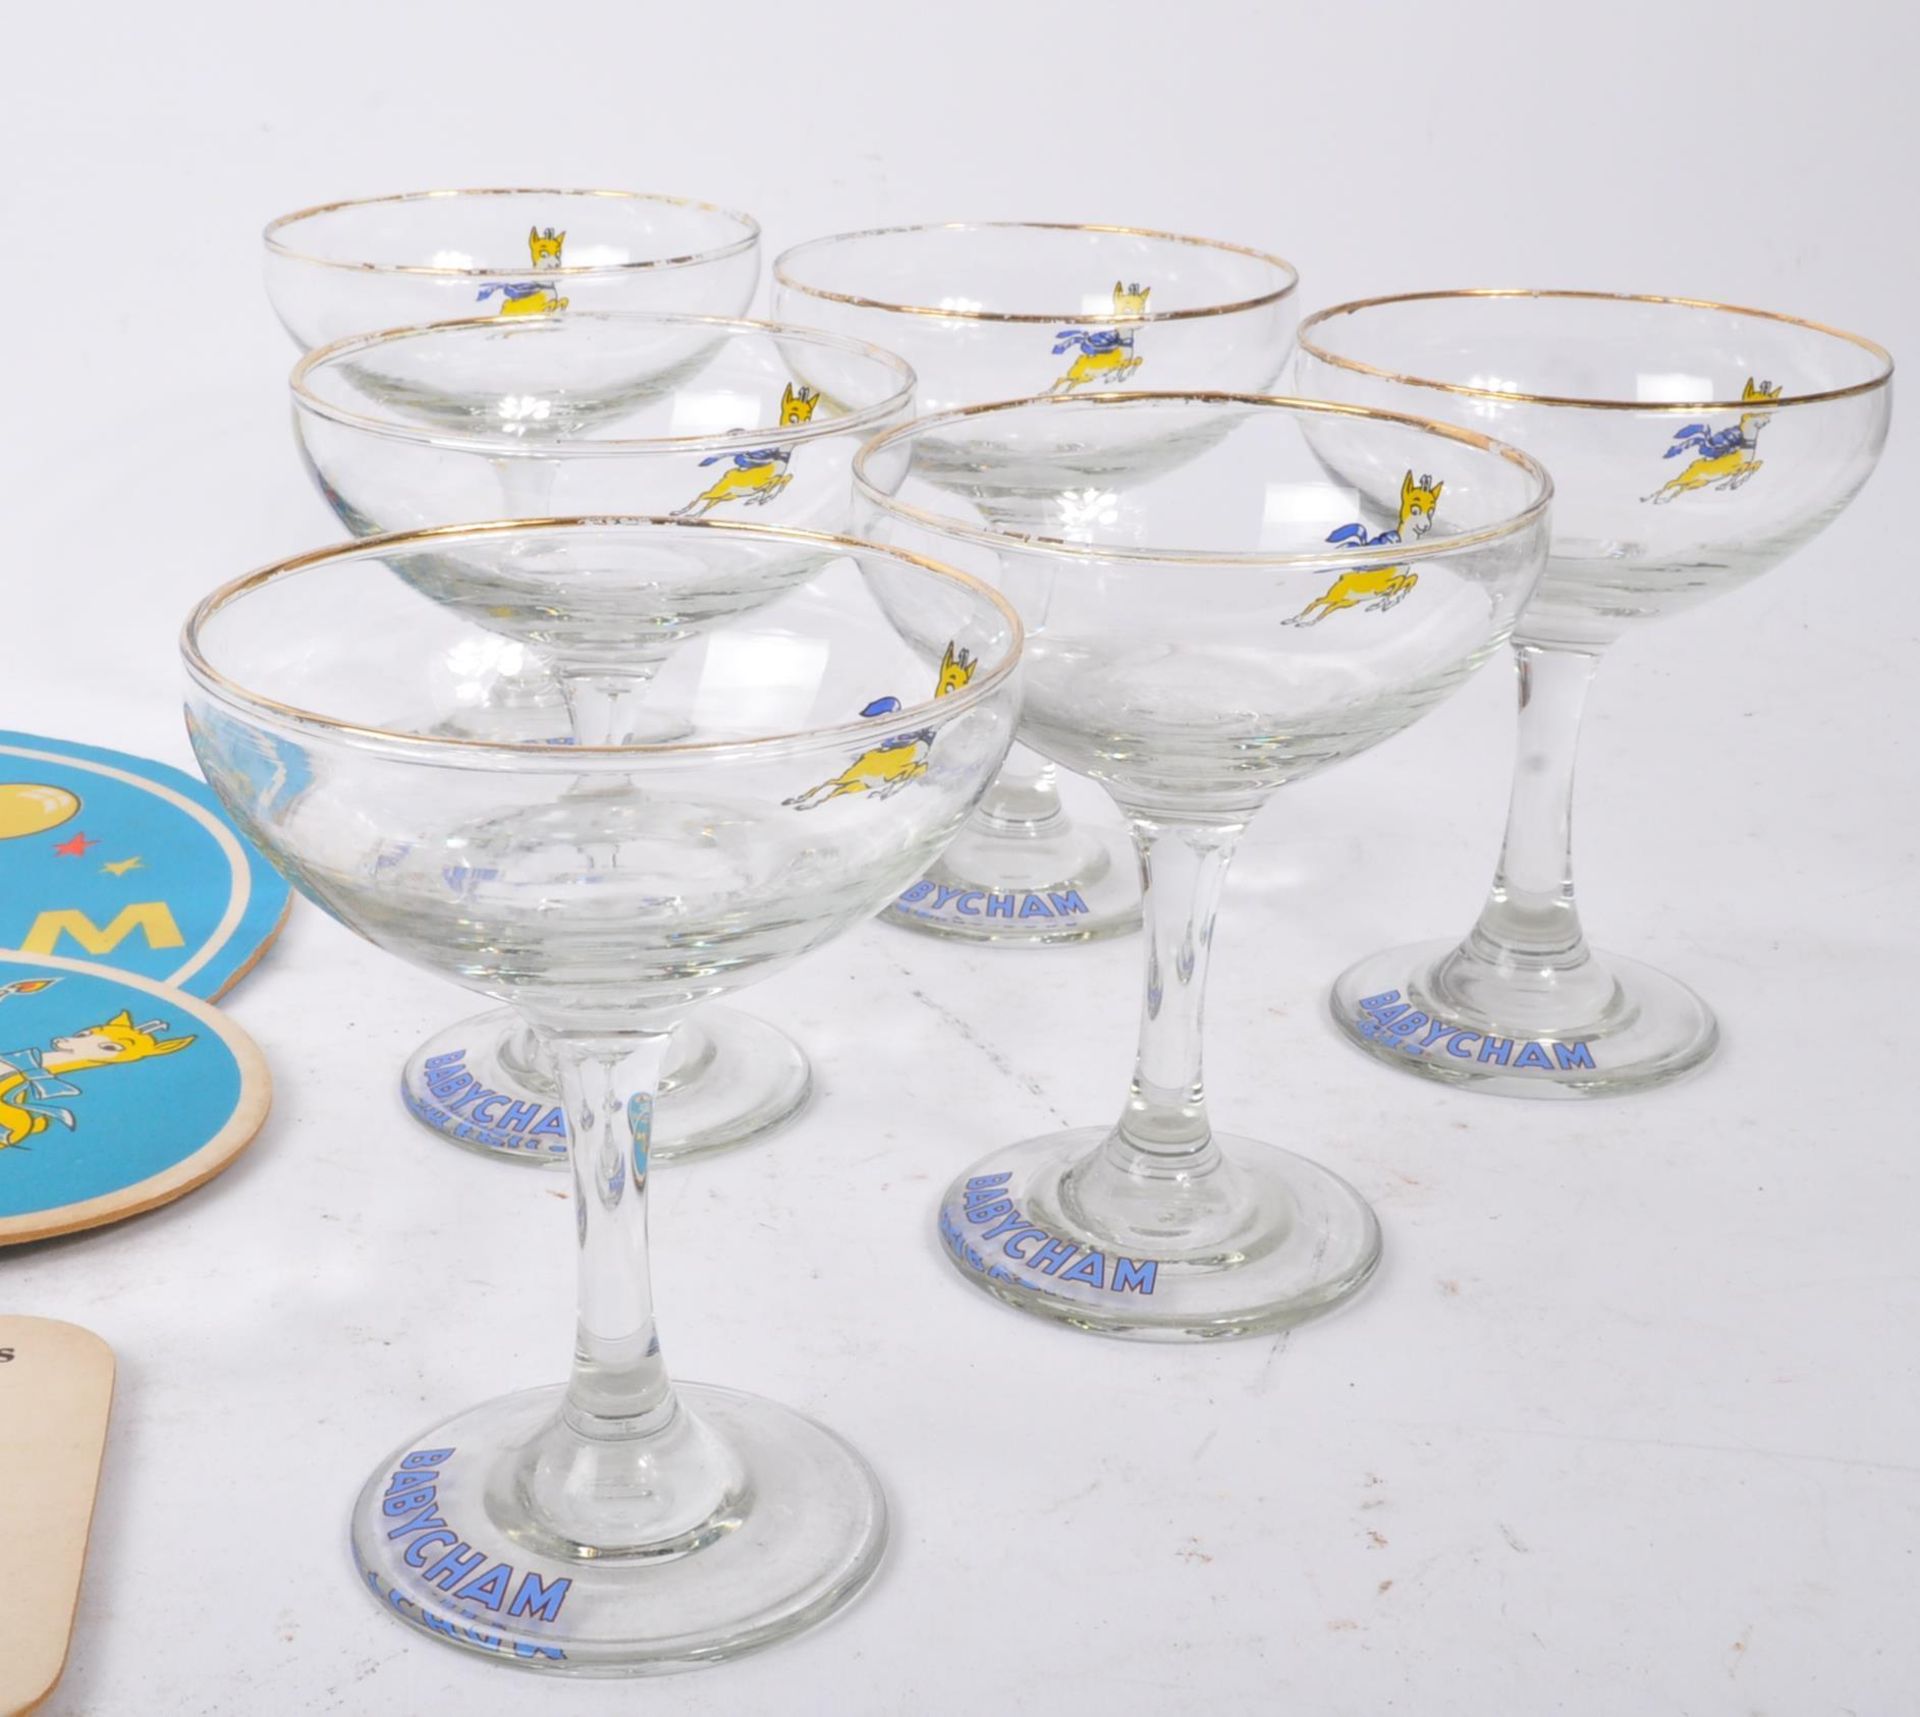 BABYCHAM - COLLECTION OF BRANDED DRINKING GLASSES - Image 3 of 7